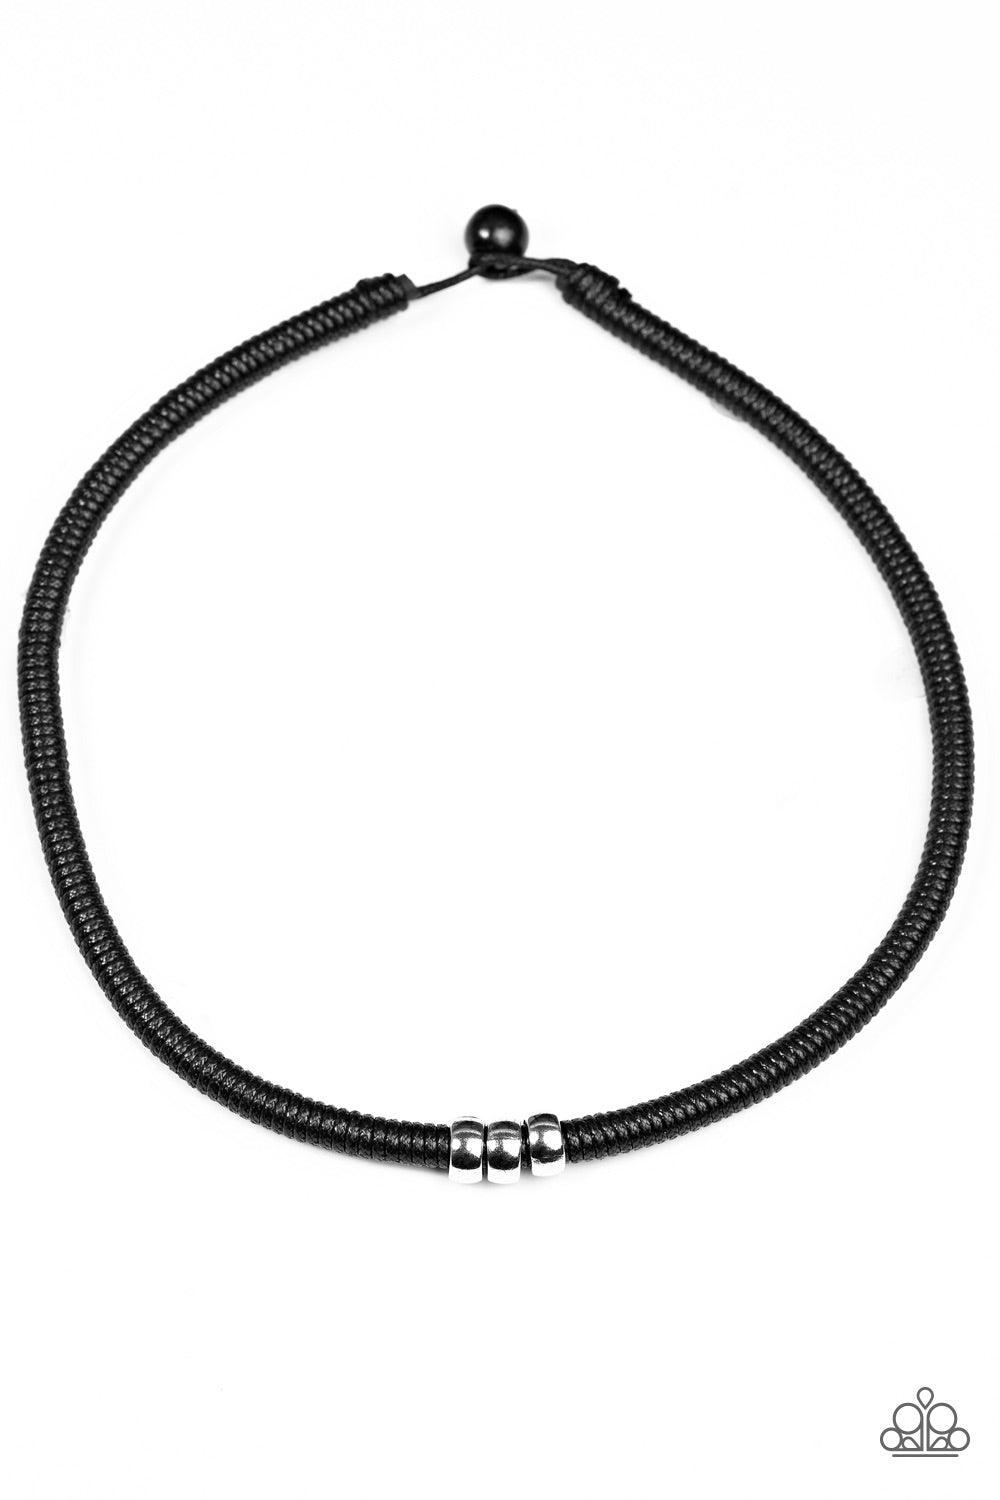 Paparazzi Accessories Trail Rules - Black Shiny black twine wraps around a black cord, creating an urban look below the collar. Shiny silver beads slide along the cording for a rugged finish. Features a button loop closure. Jewelry